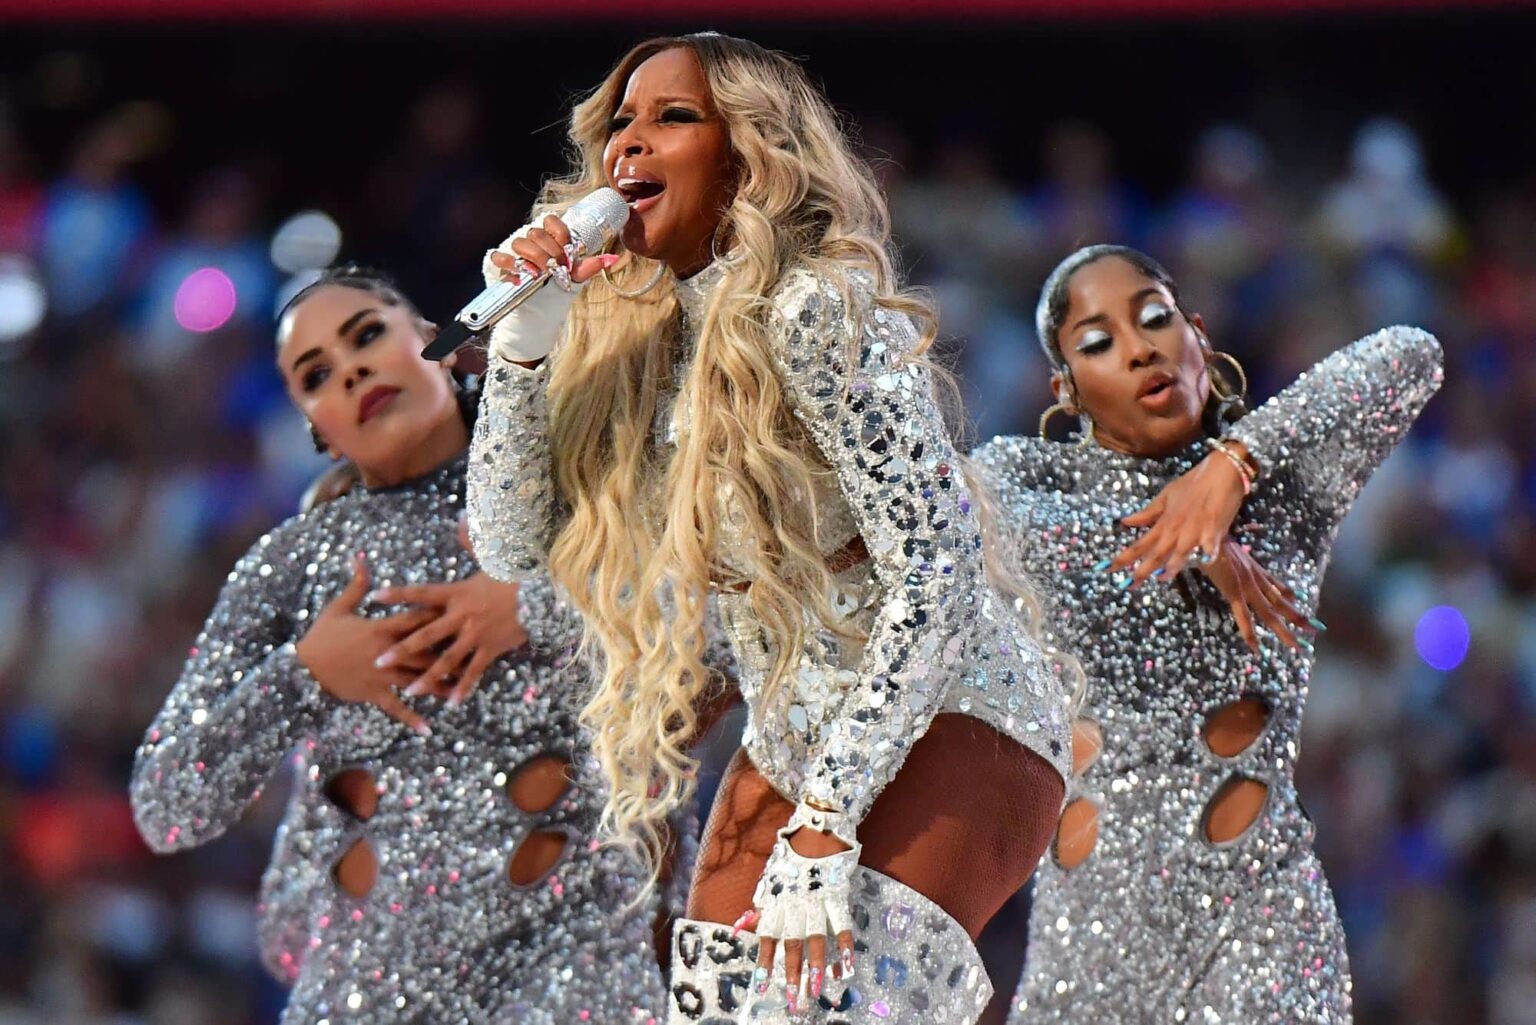 How could musical legend Mary J. Blige not be paid for her performance at the Super Bowl halftime show? Find out who else didn't get paid and why!